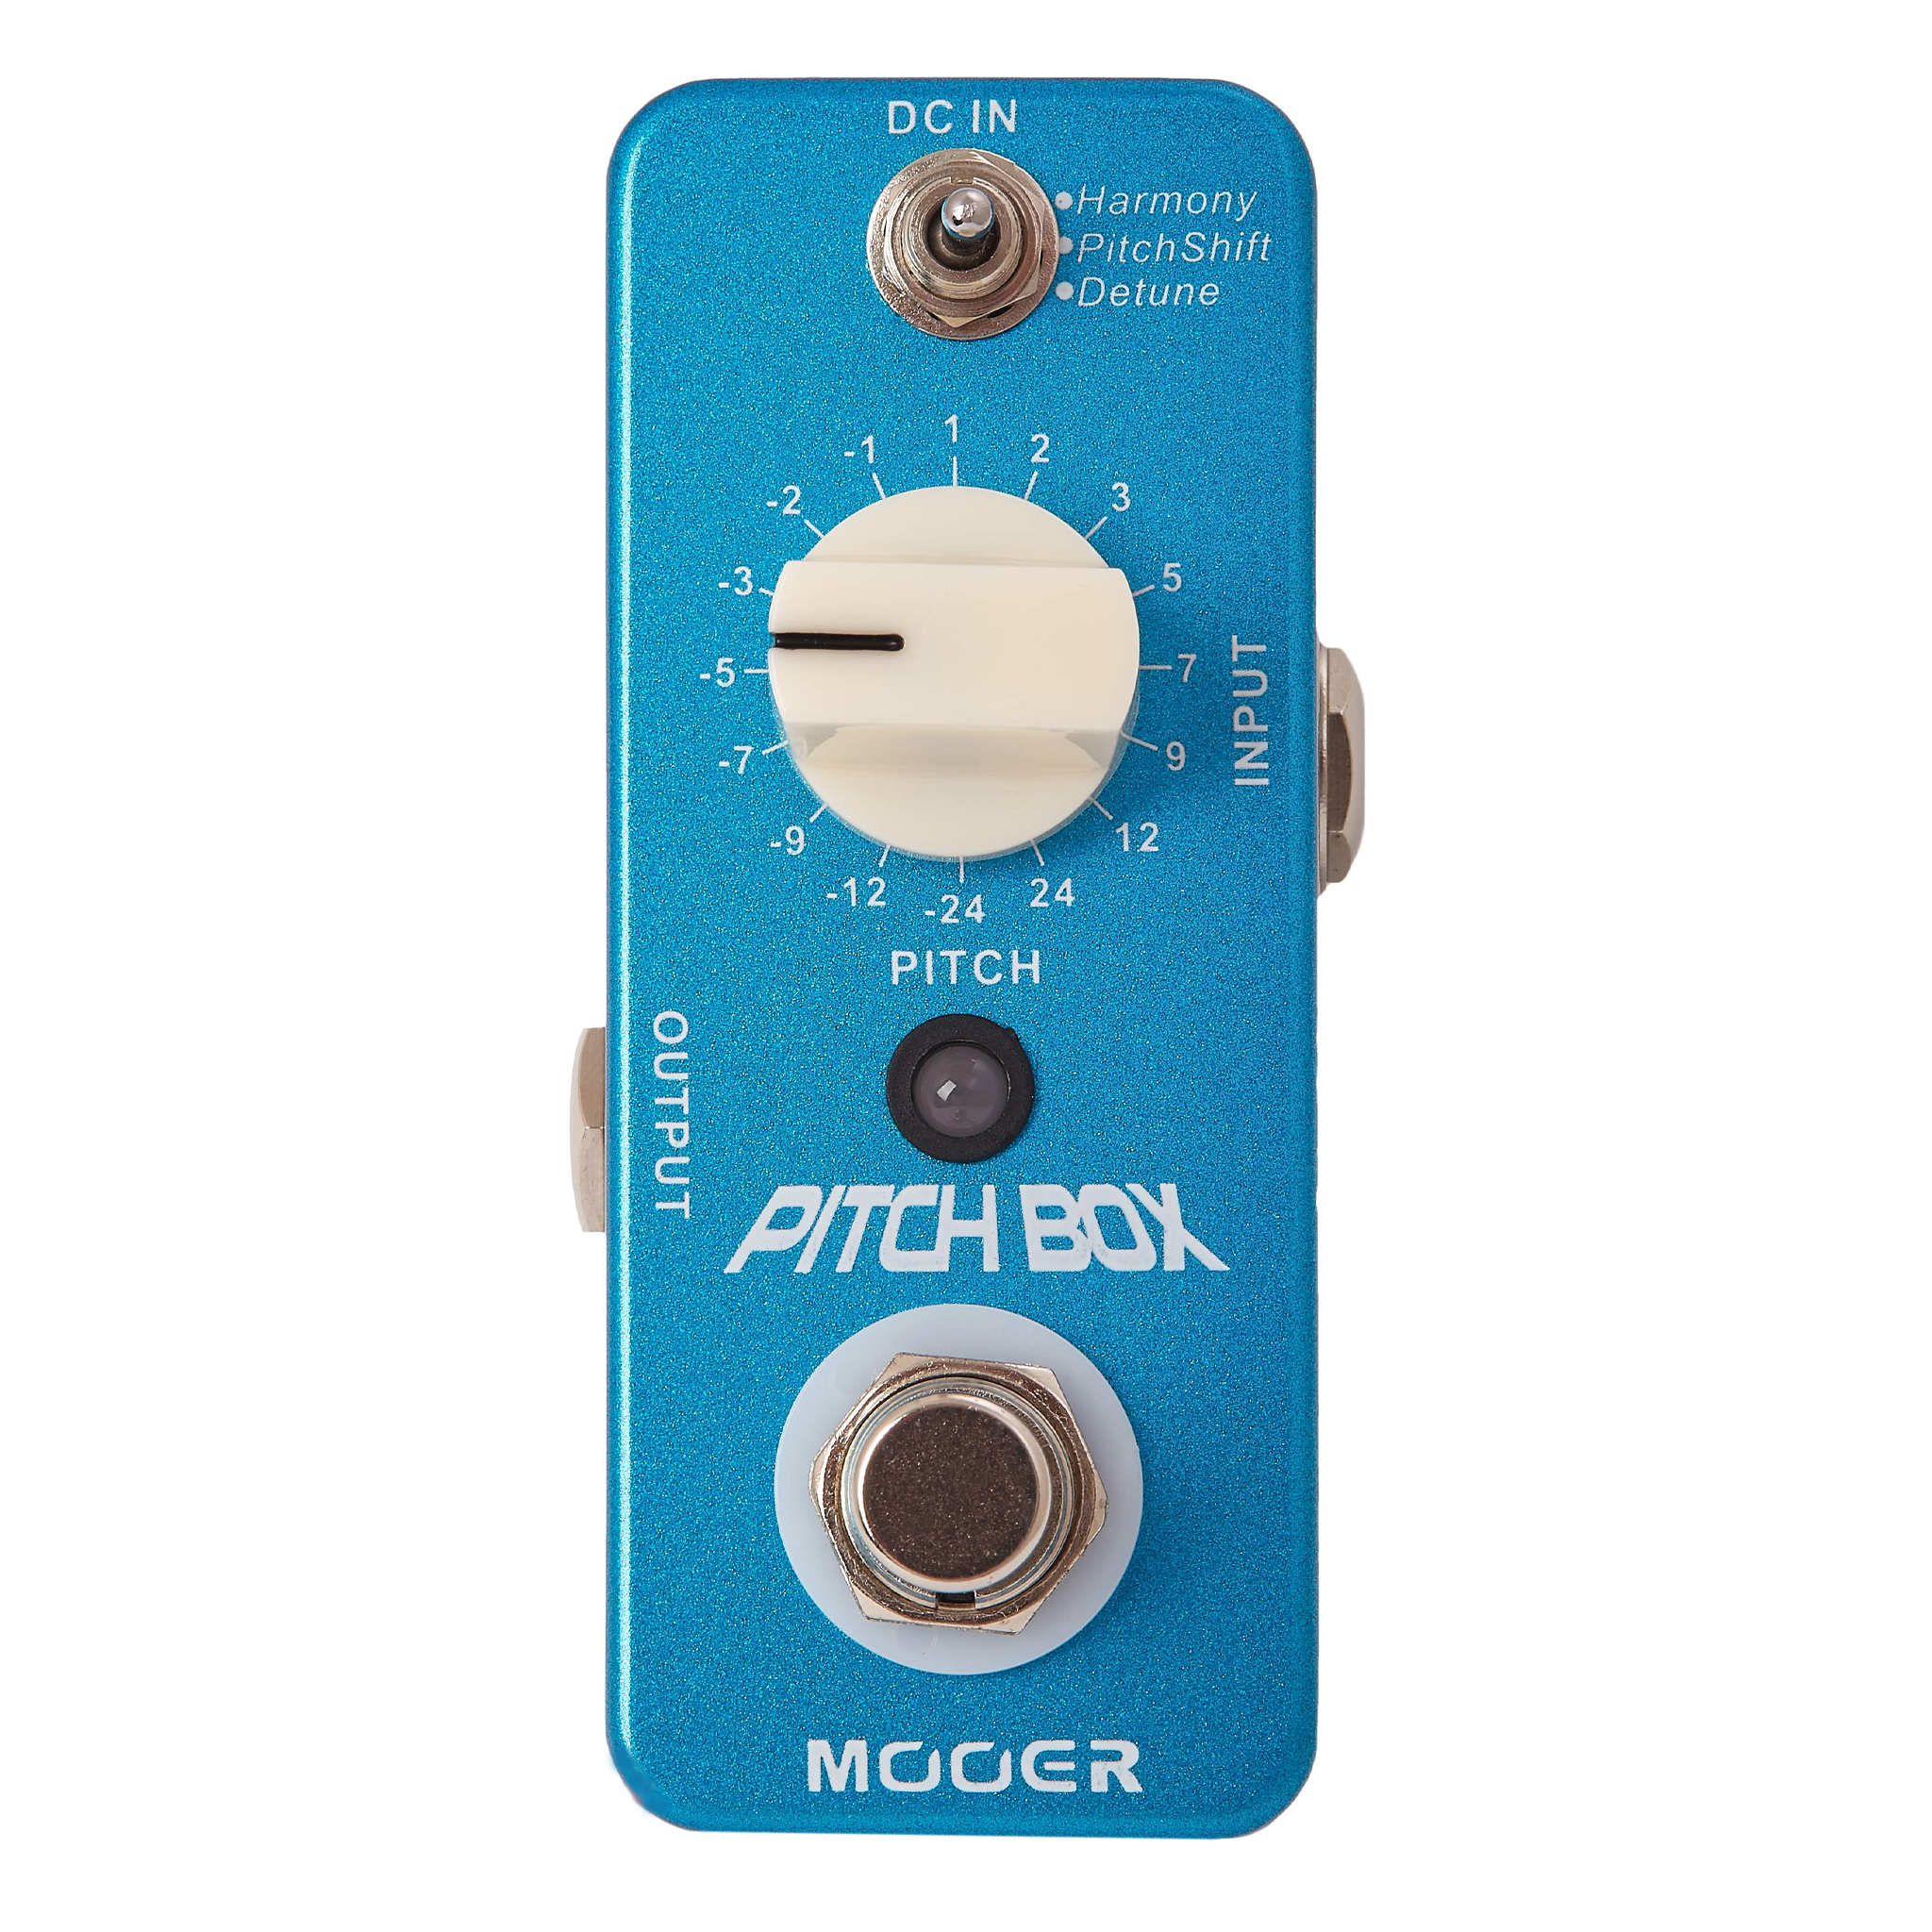 Mooer Pitch Box Pitch Shifter Guitar Effects Pedal